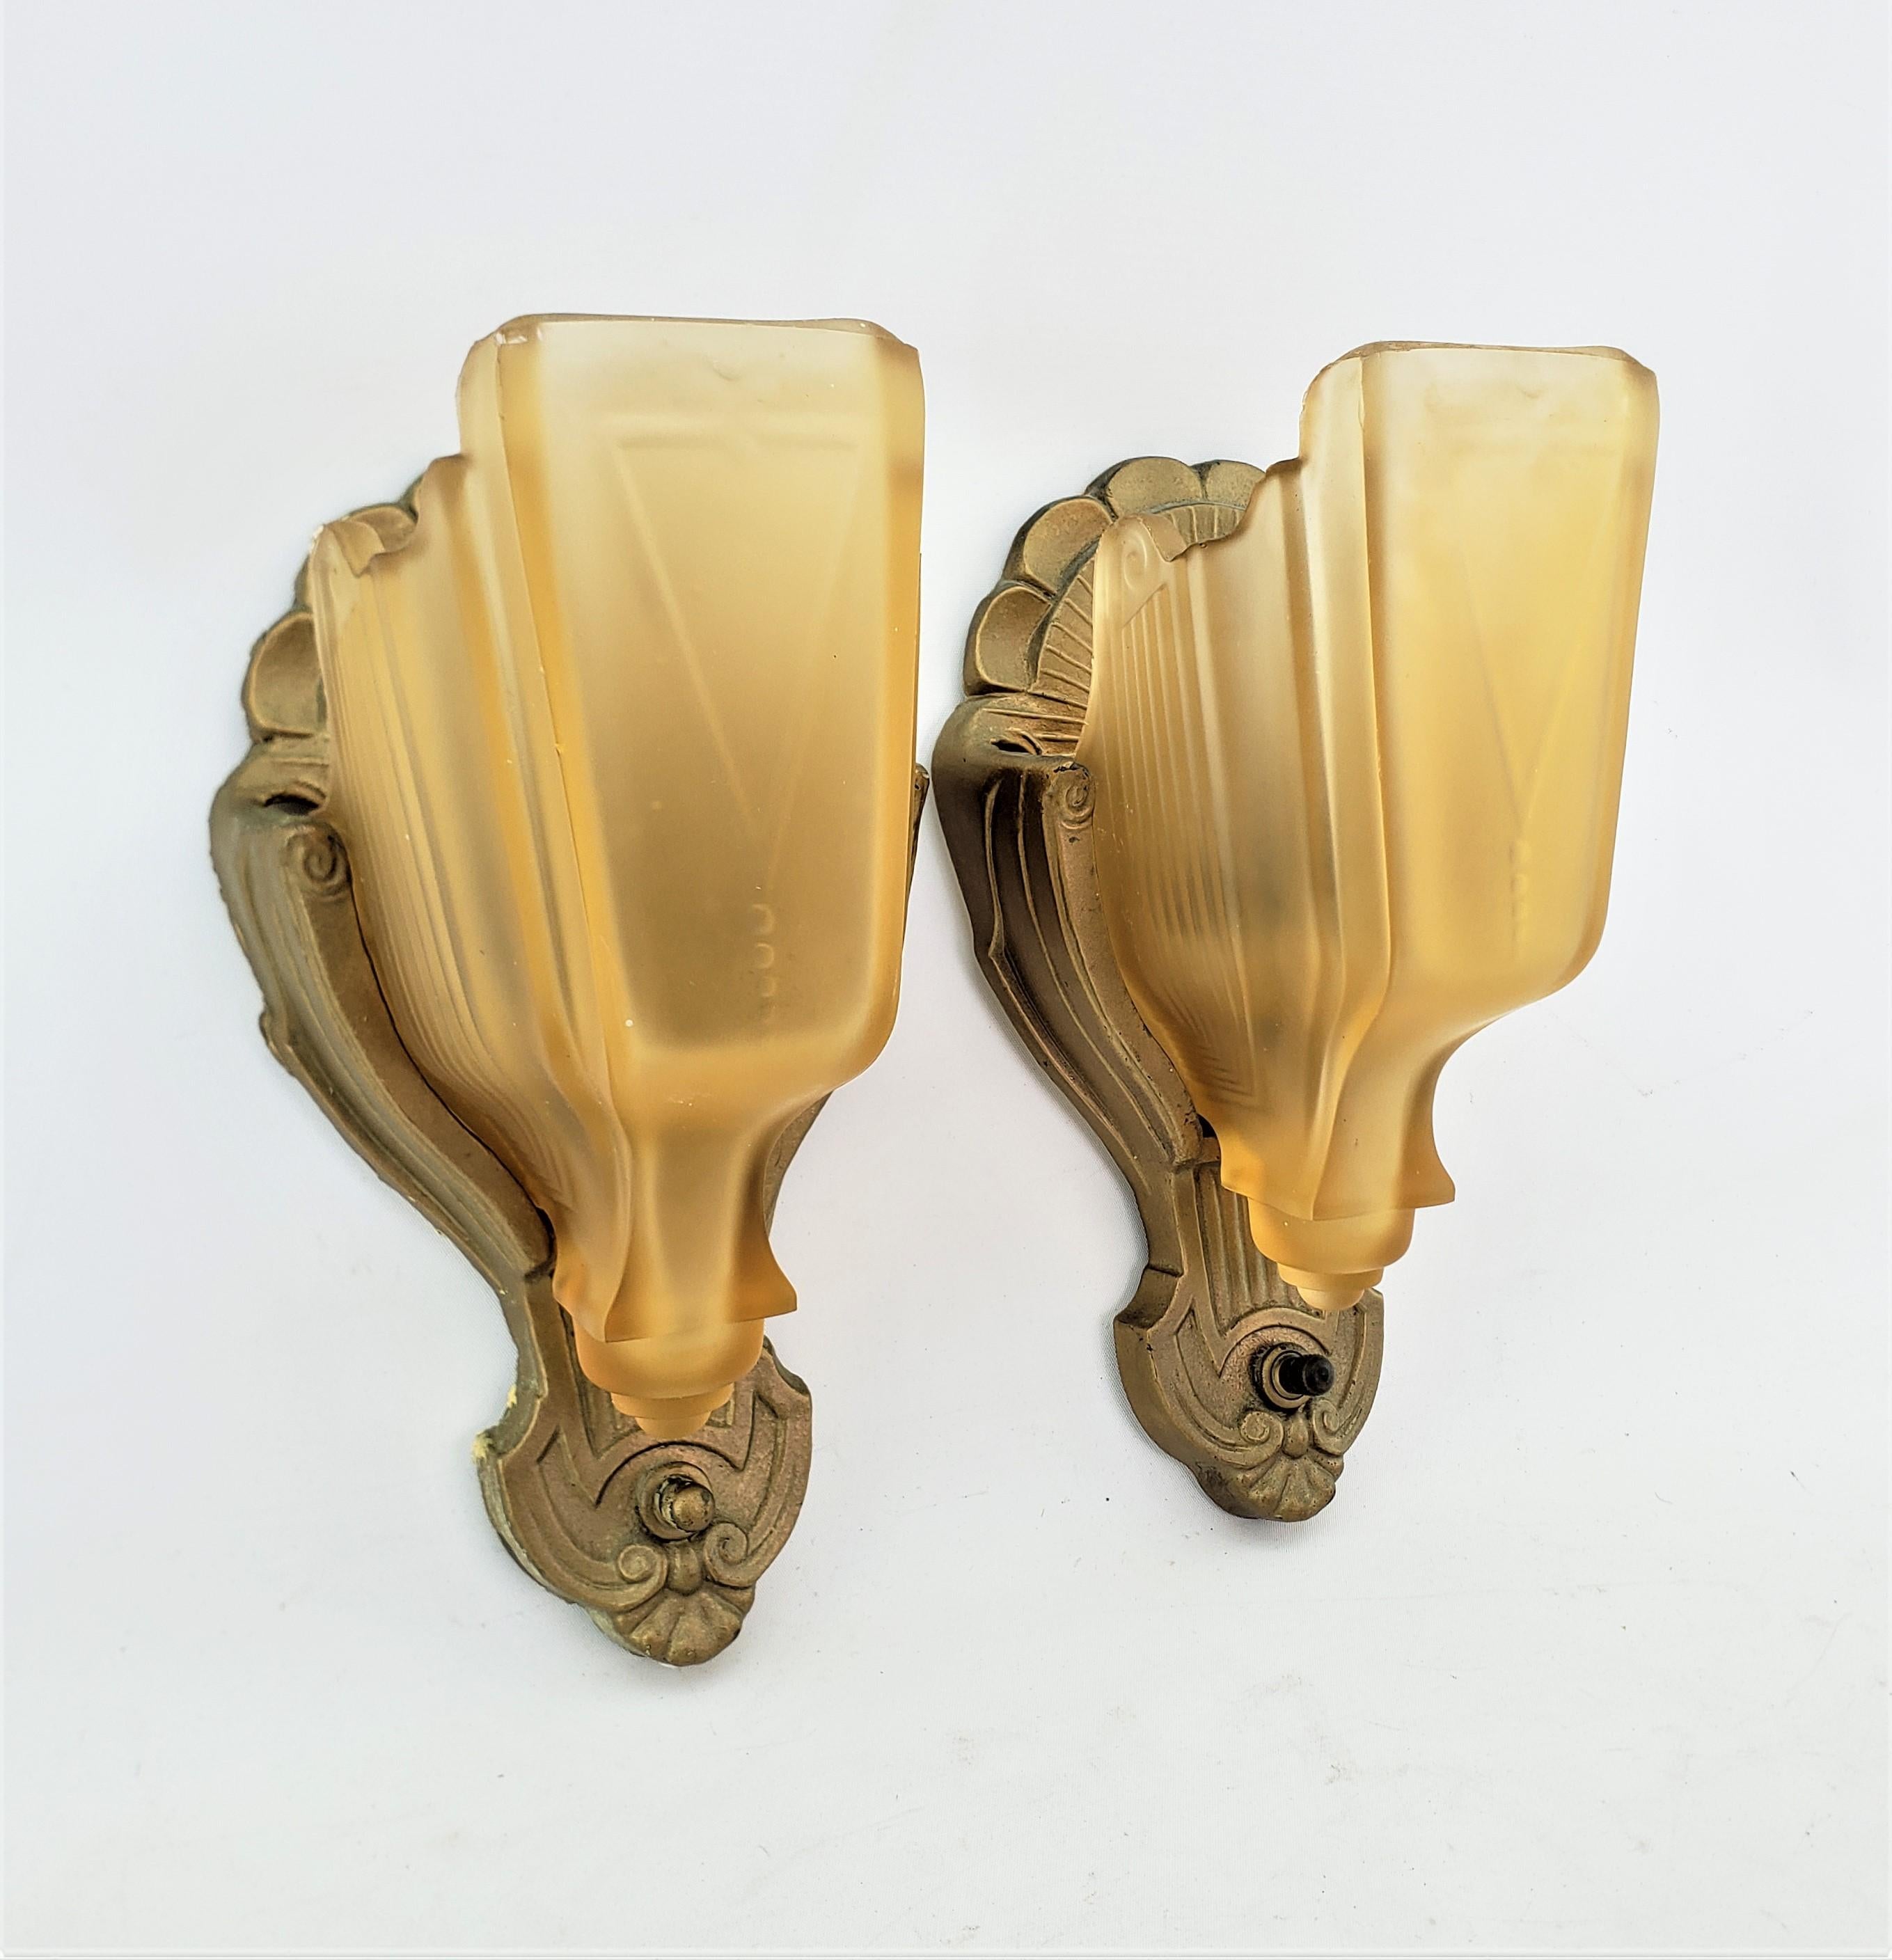 This pair of wall sconces were made are unsigned, but presumed to have originated from the United States and date to approximately 1920 and done in the period Art Deco style. The backing plates are composed of cast metal with a worn painted finish,